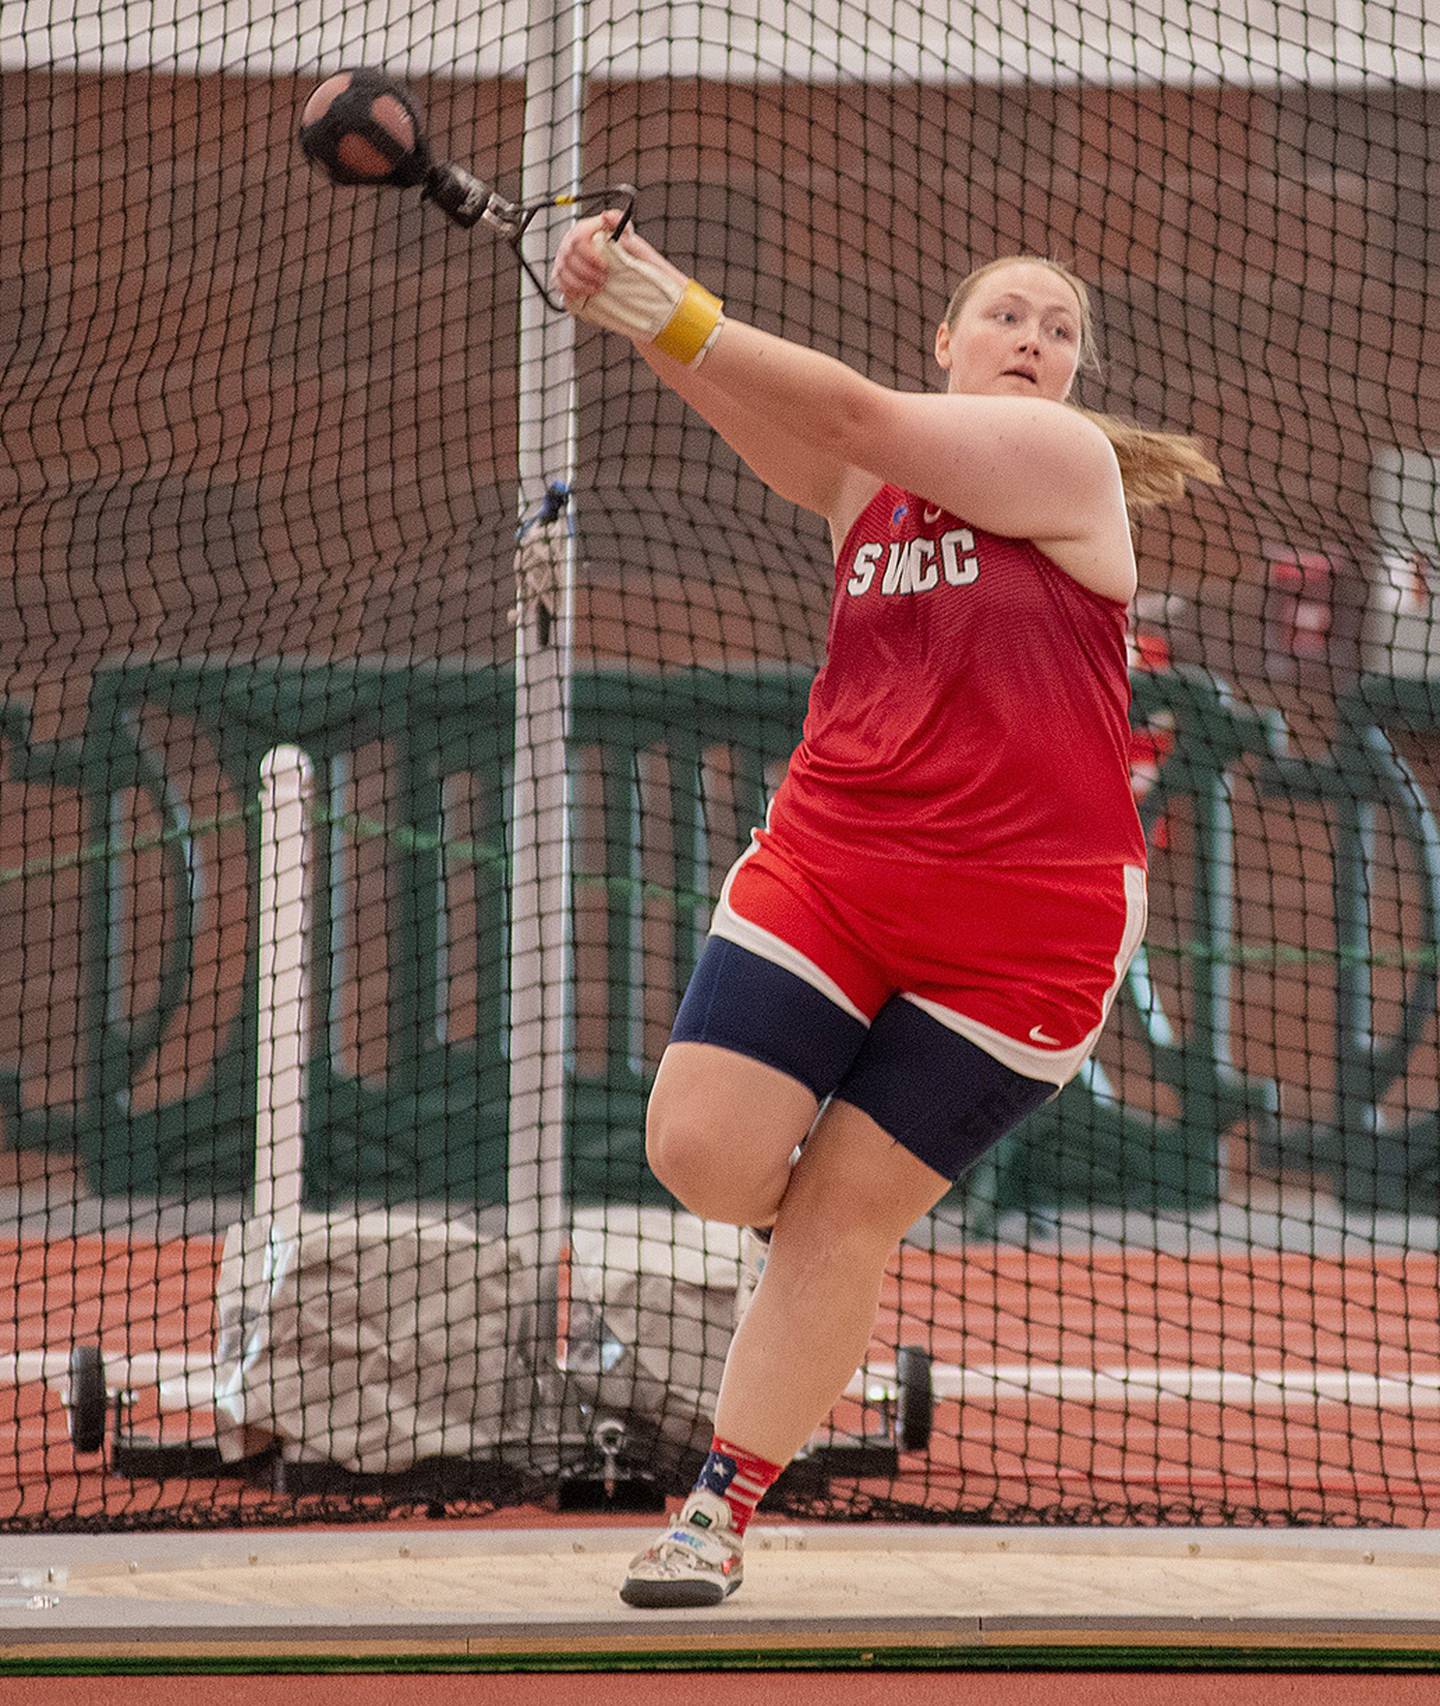 Kasey Springer of Southwestern competes in the weight throw at the Northwest Missouri State indoor meet. Springer ranks sixth all-time at SWCC with a throw of 11.14 meters, and ranks sixth all-time in the indoor shot put at 9.92 meters (32 feet, 6.5 inches).